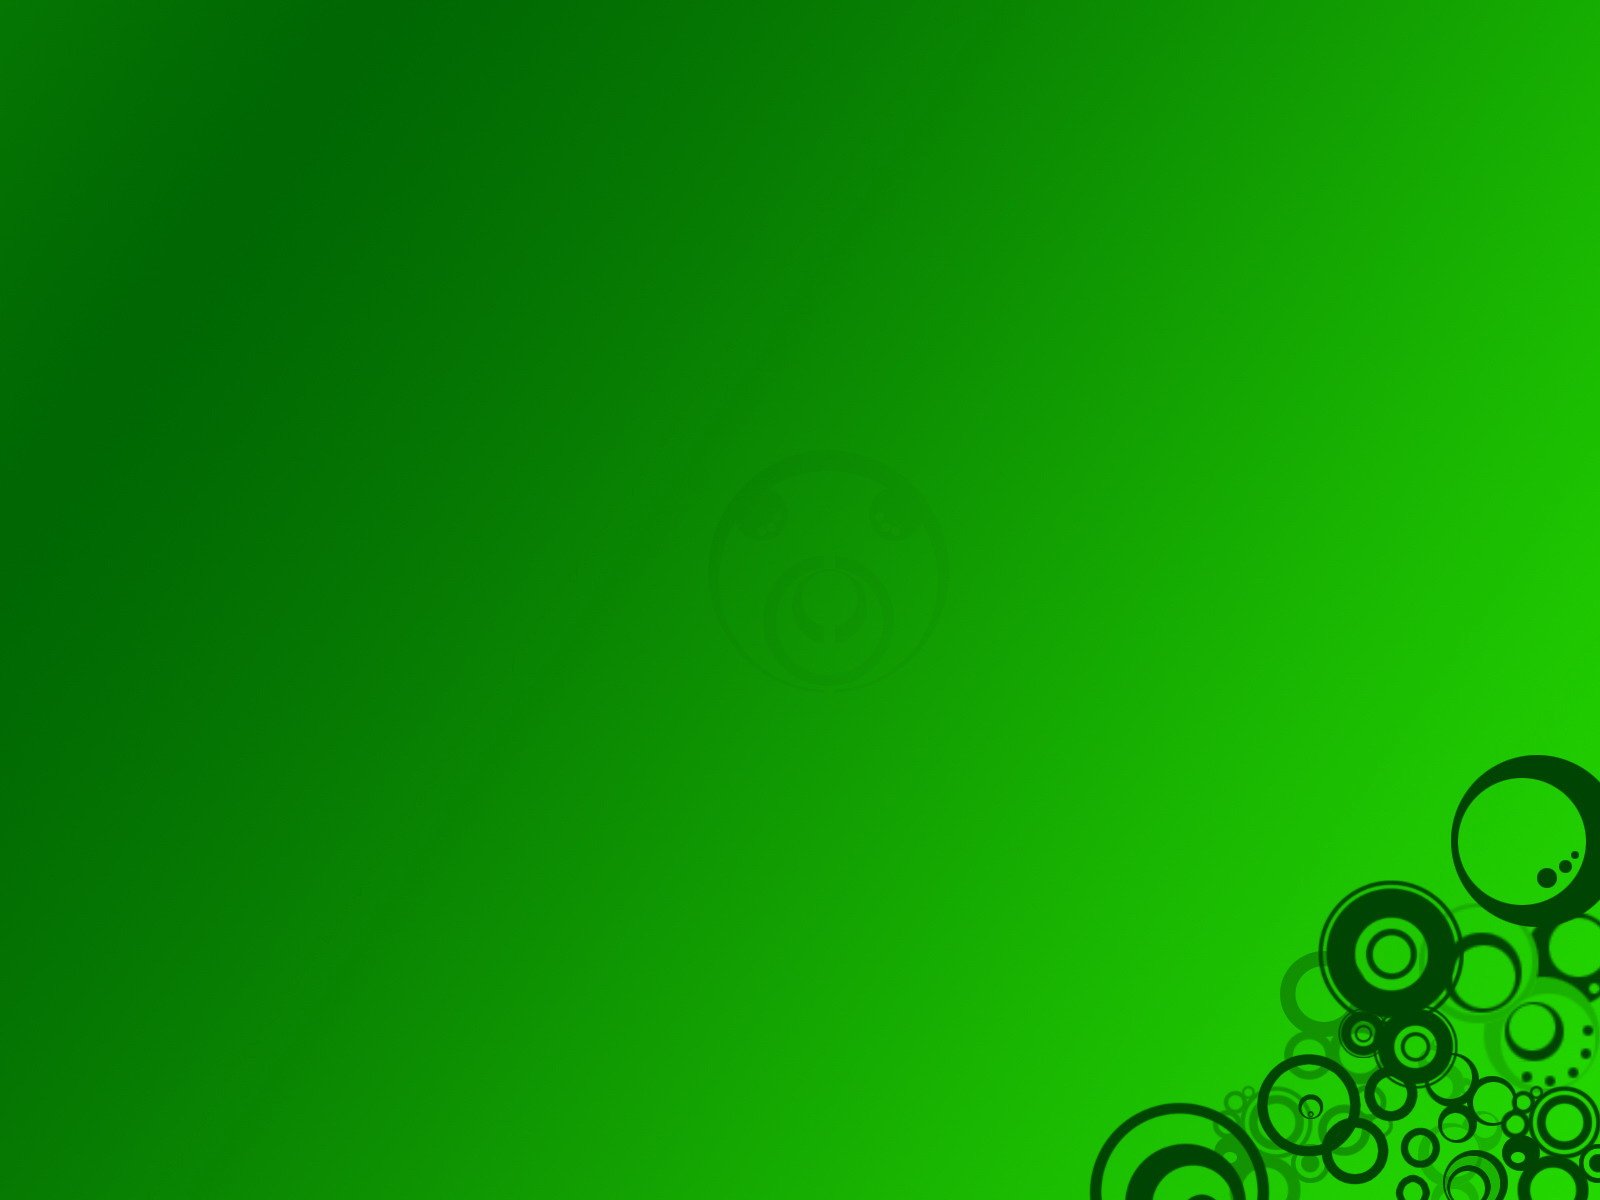 A Place For Free HD Wallpapers Desktop Wallpapers Green